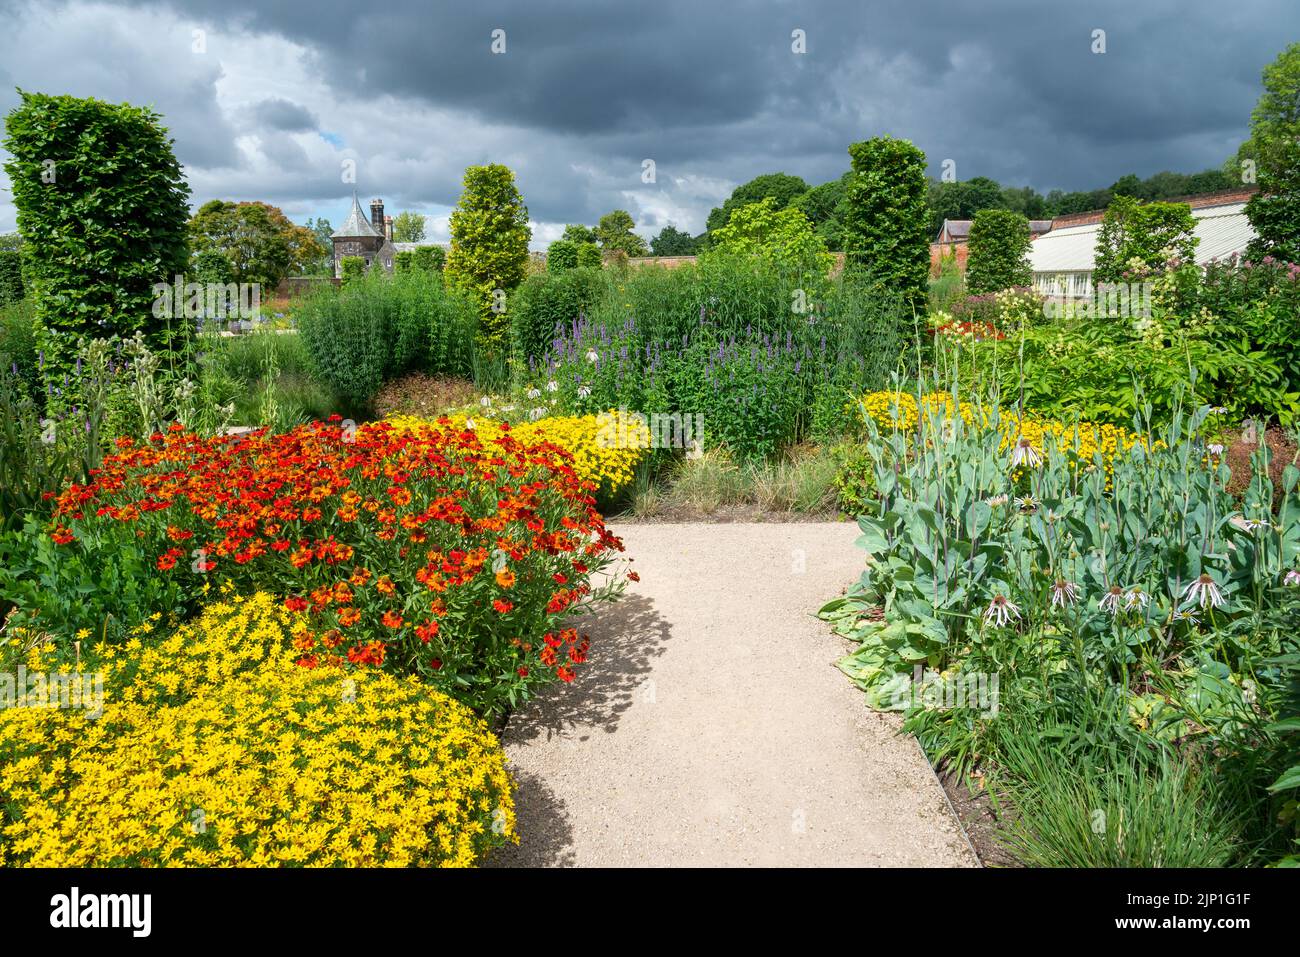 The Paradise garden at RHS Bridgewater, Worsley, Greater Manchester, England. Stock Photo